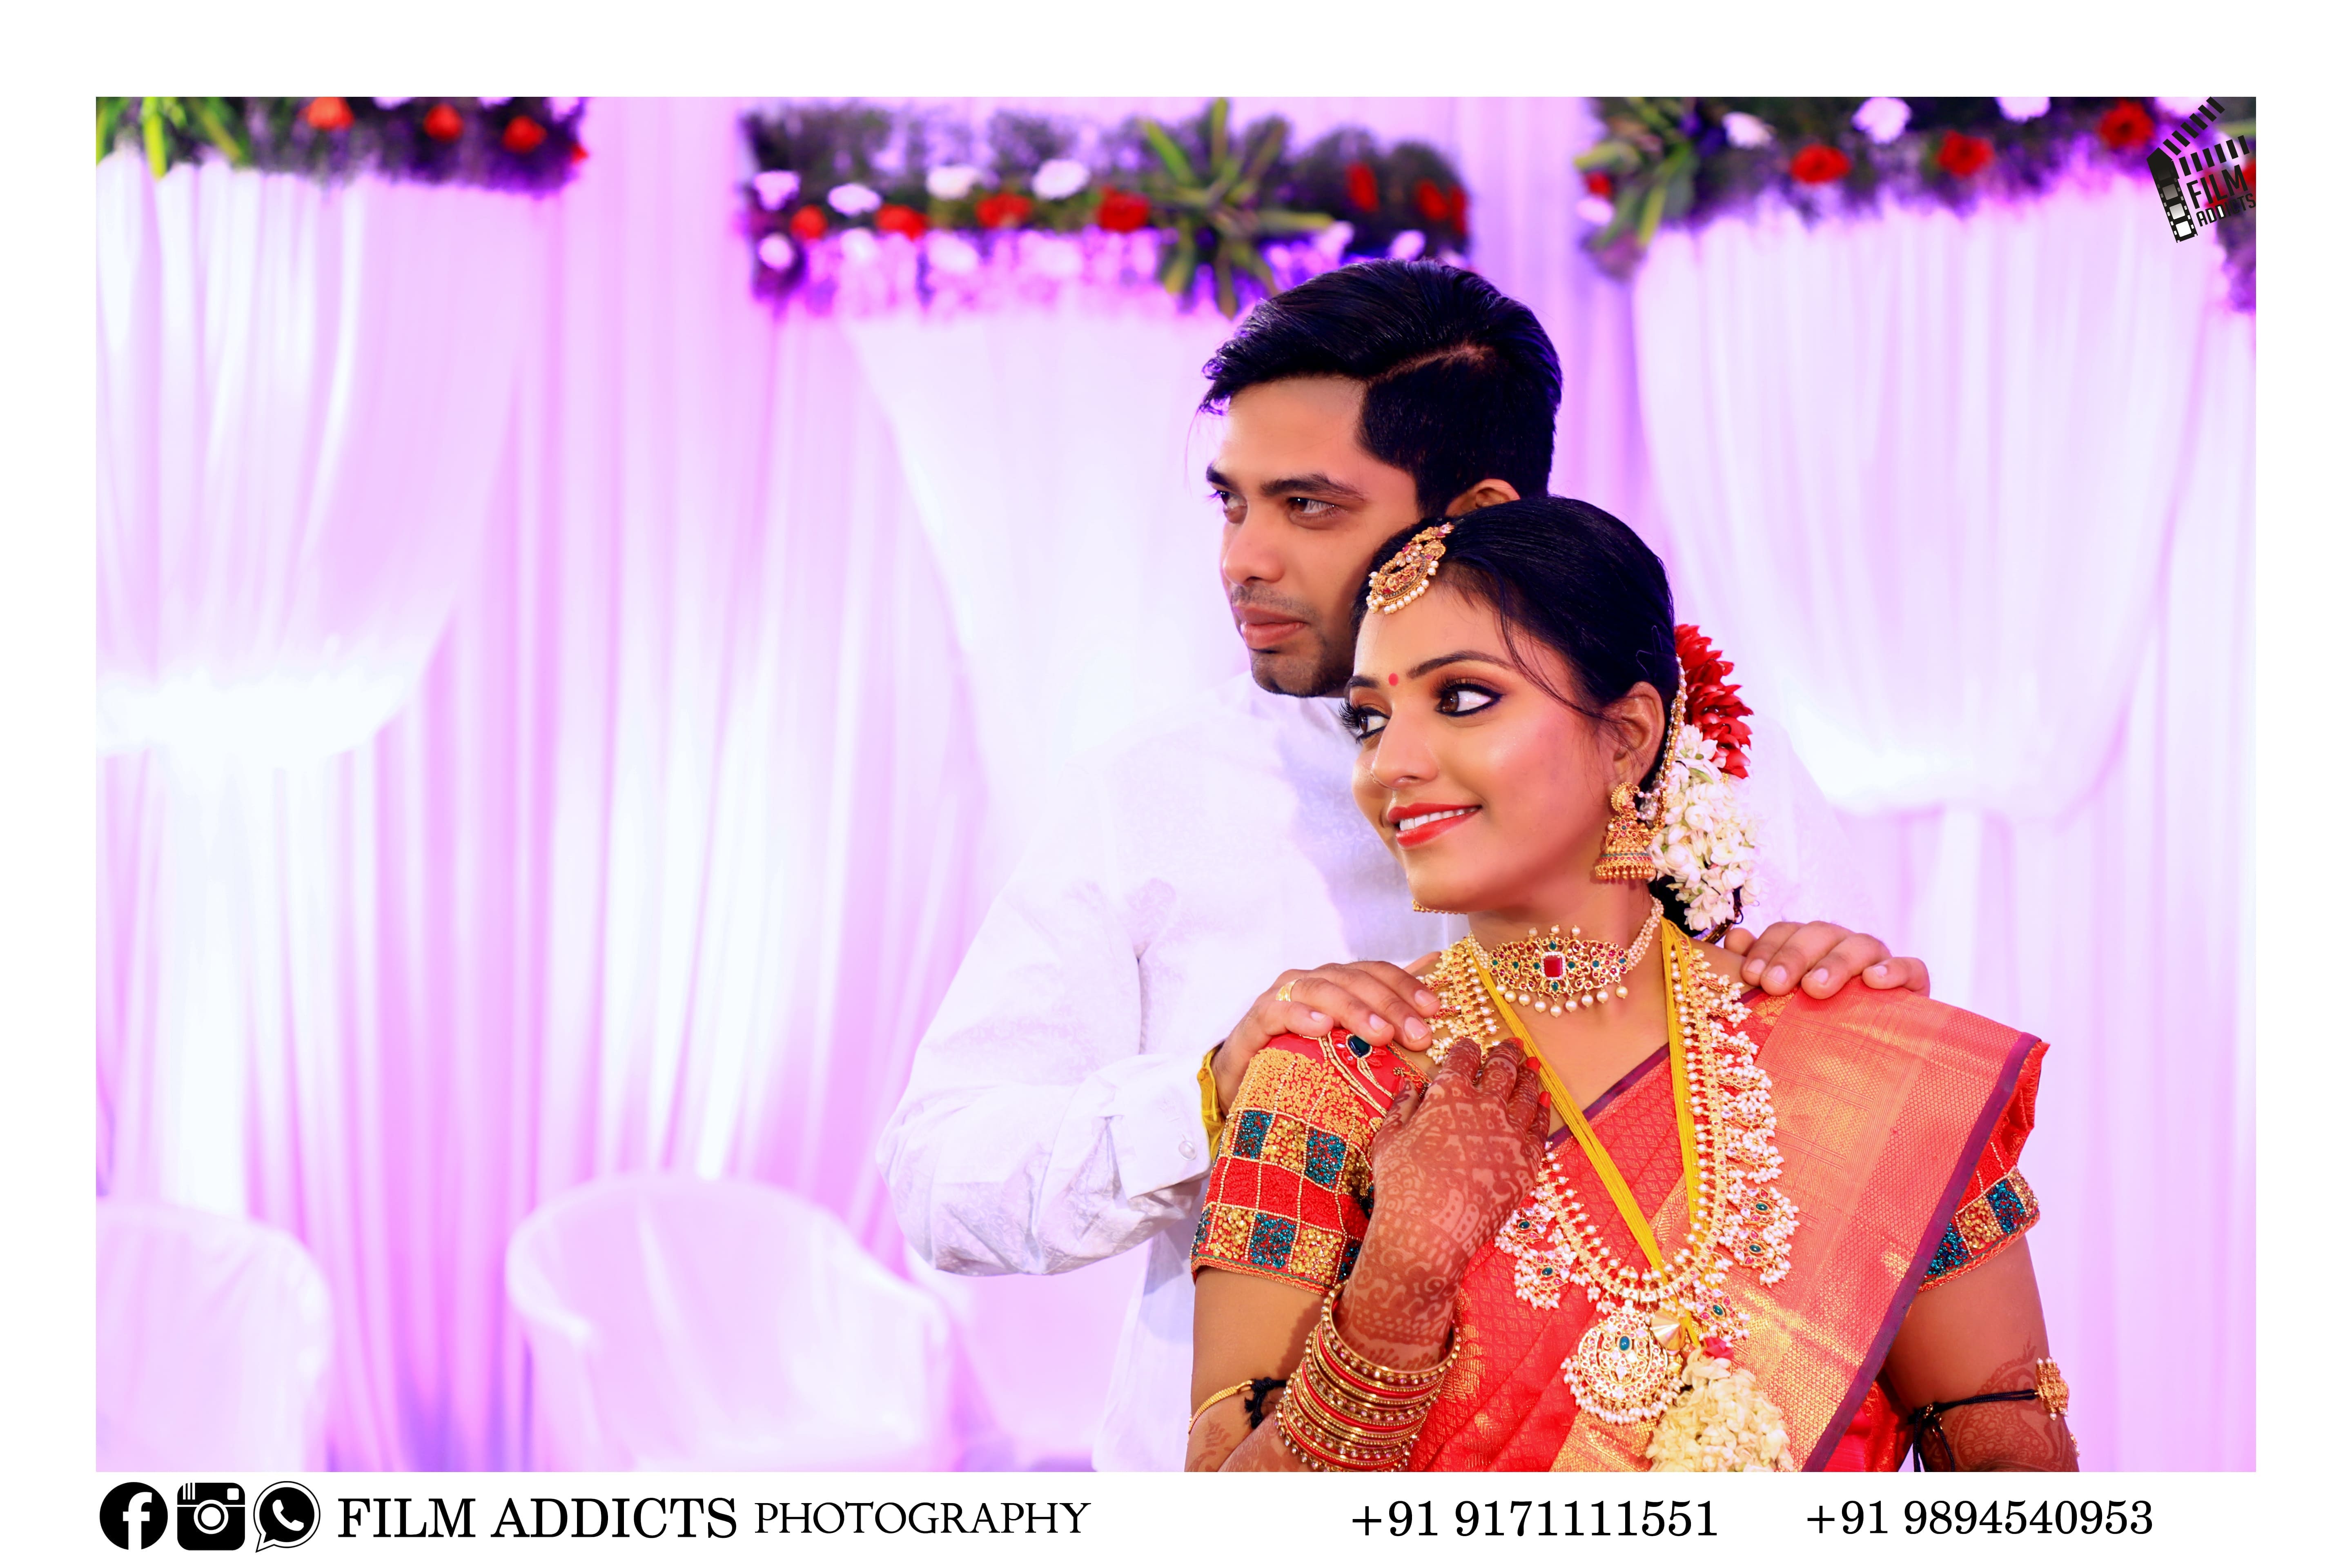 Best Candid Photograpers in Rajapalayam, Best Wedding Photographers in Rajapalayam, Best candid photographers in Rajapalayam, Best Wedding Candid photographers in Rajapalayam, Wedding Candid Moments, FilmAddicts, Photography, FilmAddictsPhotography, best wedding in Rajapalayam, Best Candid shoot in Rajapalayam, best moment, Best wedding moments, Best wedding photography in Rajapalayam, Best wedding videography in Rajapalayam, Best couple shoot, Best candid, Best wedding shoot, Best wedding candid, best marraige photographers in Rajapalayam, best marraige photography in Rajapalayam, best candid photography, best Rajapalayam photography, Rajapalayam, Rajapalayam photography, Rajapalayam couples, candid shoot, candid, tamilnadu wedding photography, best photographers in Rajapalayam, Best Candid Photograpers in Virudhunagar, Best Wedding Photographers in Virudhunagar, Best candid photographers in Virudhunagar, Best Wedding Candid photographers in Virudhunagar, Wedding Candid Moments, FilmAddicts, Photography, FilmAddictsPhotography, best wedding in Virudhunagar, Best Candid shoot in Virudhunagar, best moment, Best wedding moments, Best wedding photography in Virudhunagar, Best wedding videography in Virudhunagar, Best couple shoot, Best candid, Best wedding shoot, Best wedding candid, best marraige photographers in Virudhunagar, best marraige photography in Virudhunagar, best candid photography, best Virudhunagar photography, Virudhunagar, Virudhunagar photography, Virudhunagar couples, candid shoot, candid, tamilnadu wedding photography, best photographers in Virudhunagar, tamilnadu